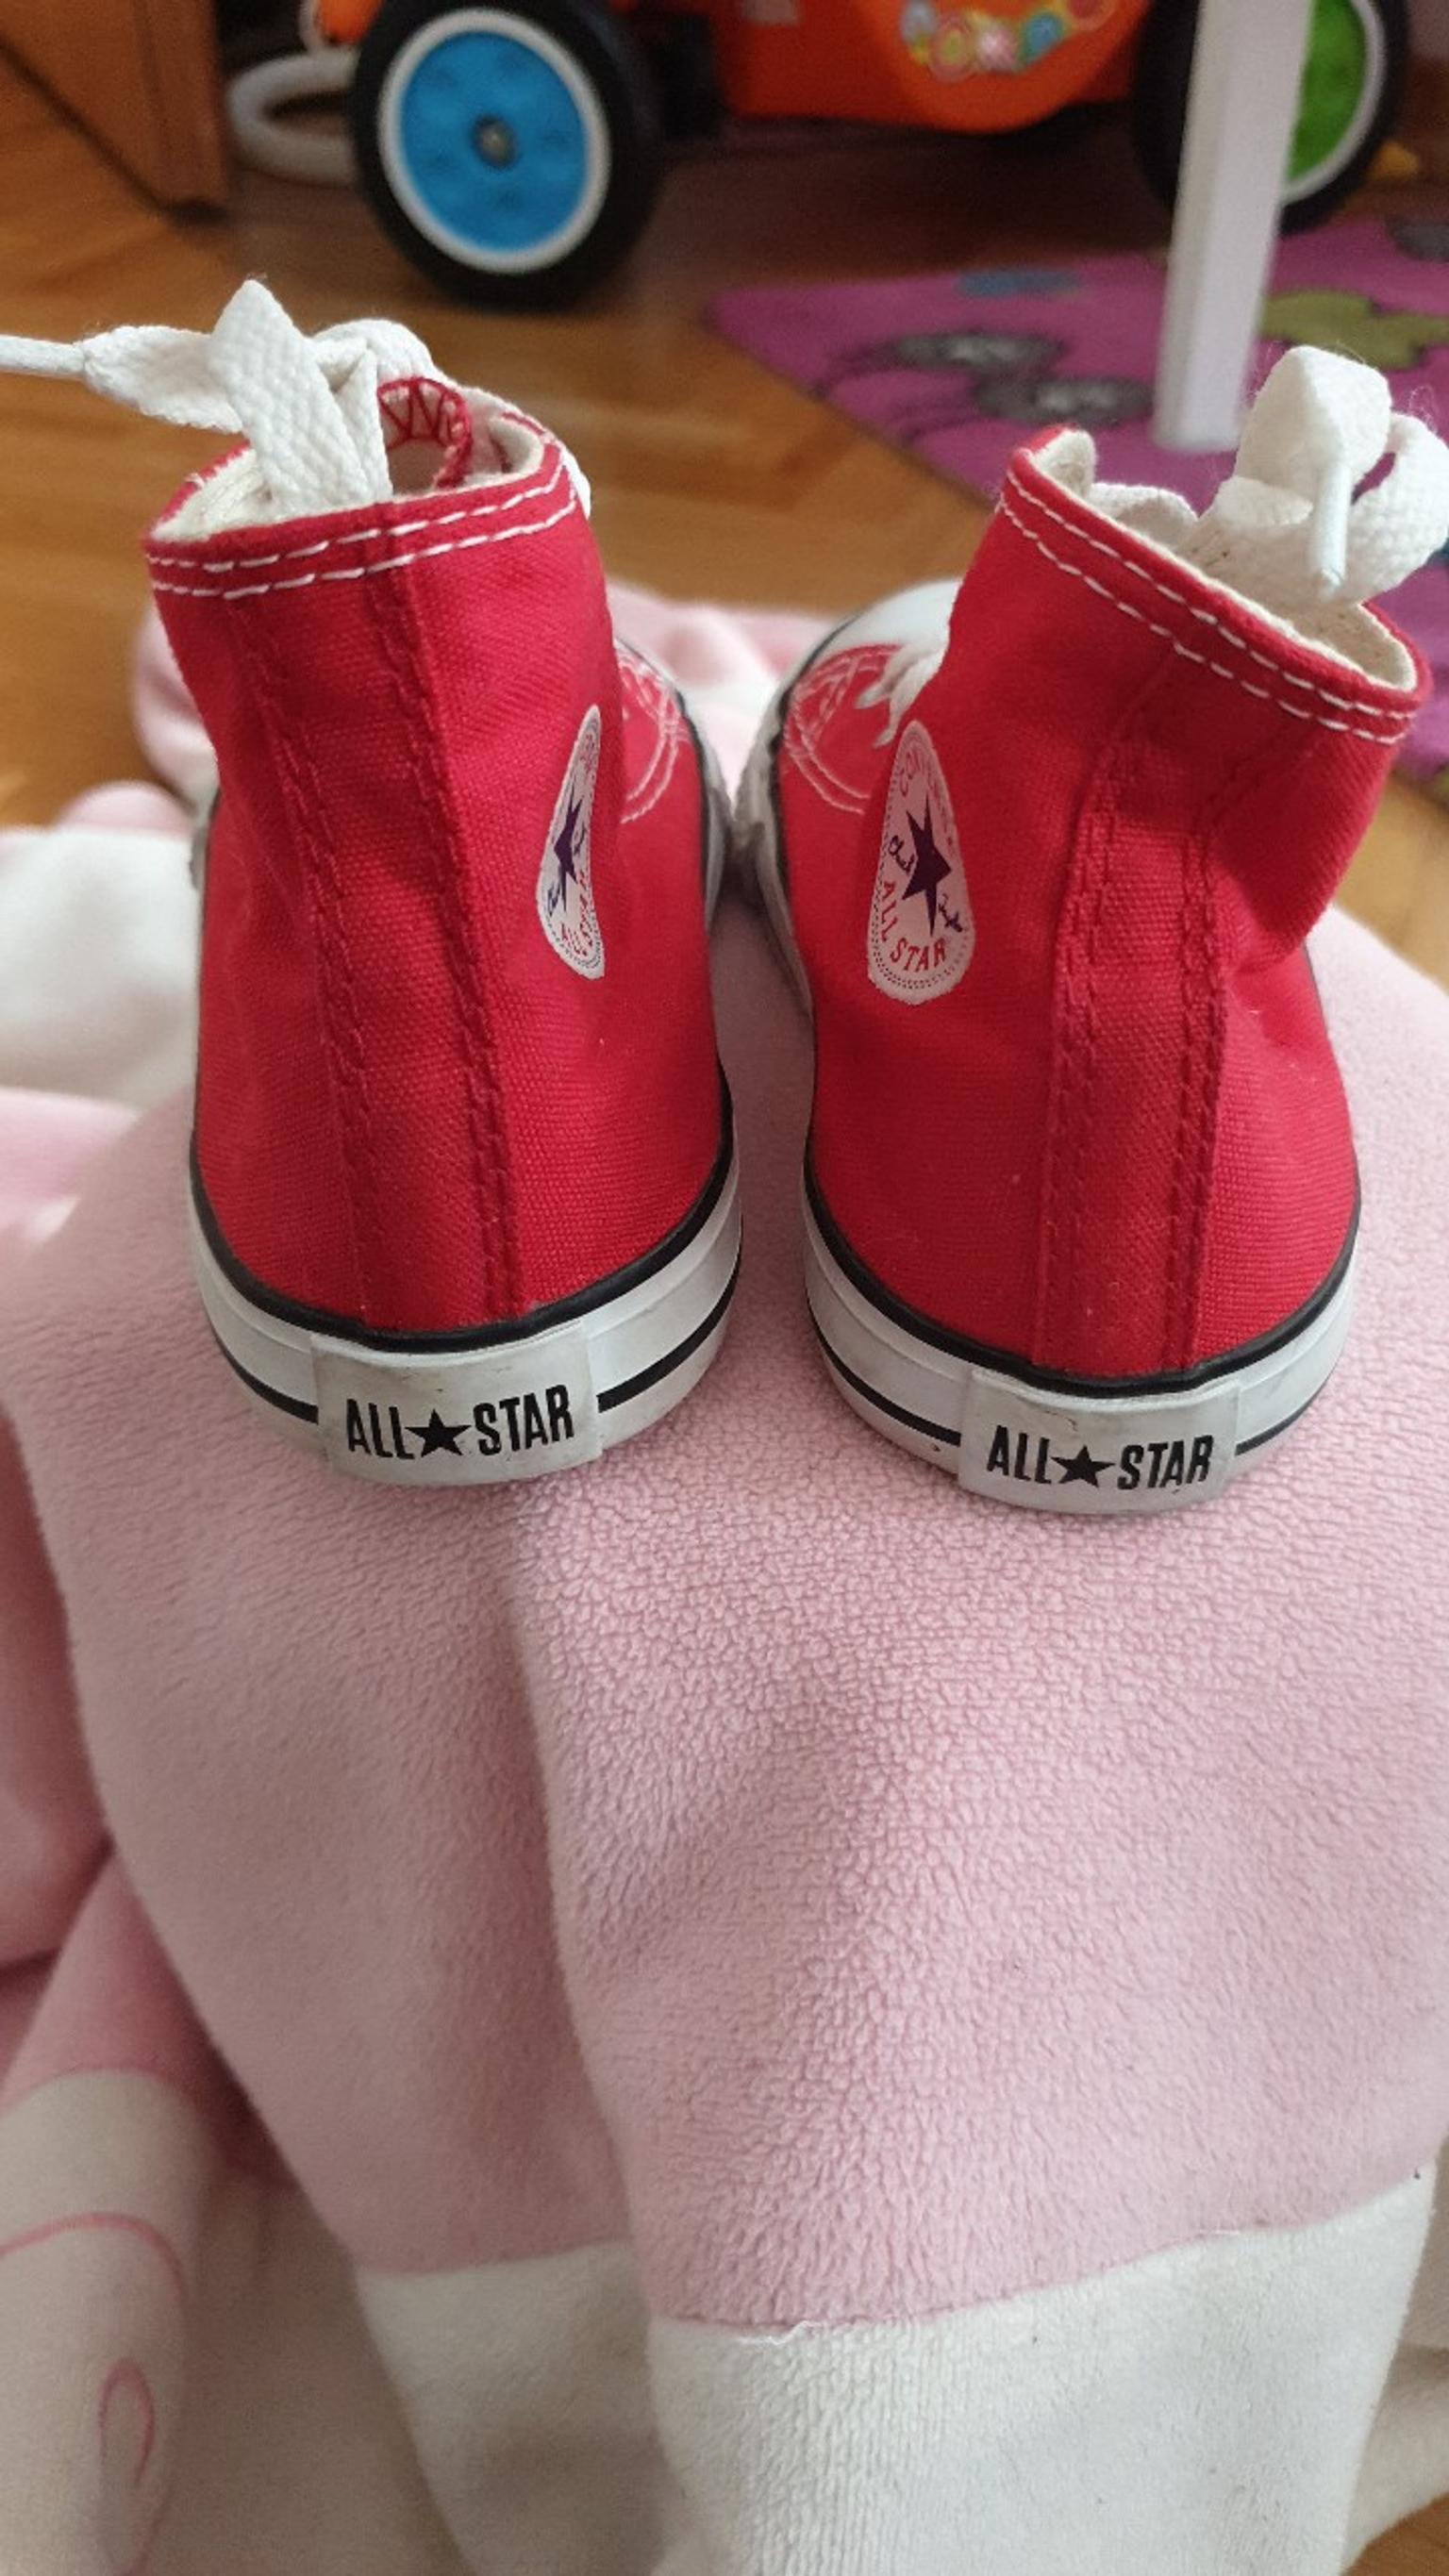 Converse 23 Schuhe in 1220 KG Kagran for €20.00 for sale | Shpock